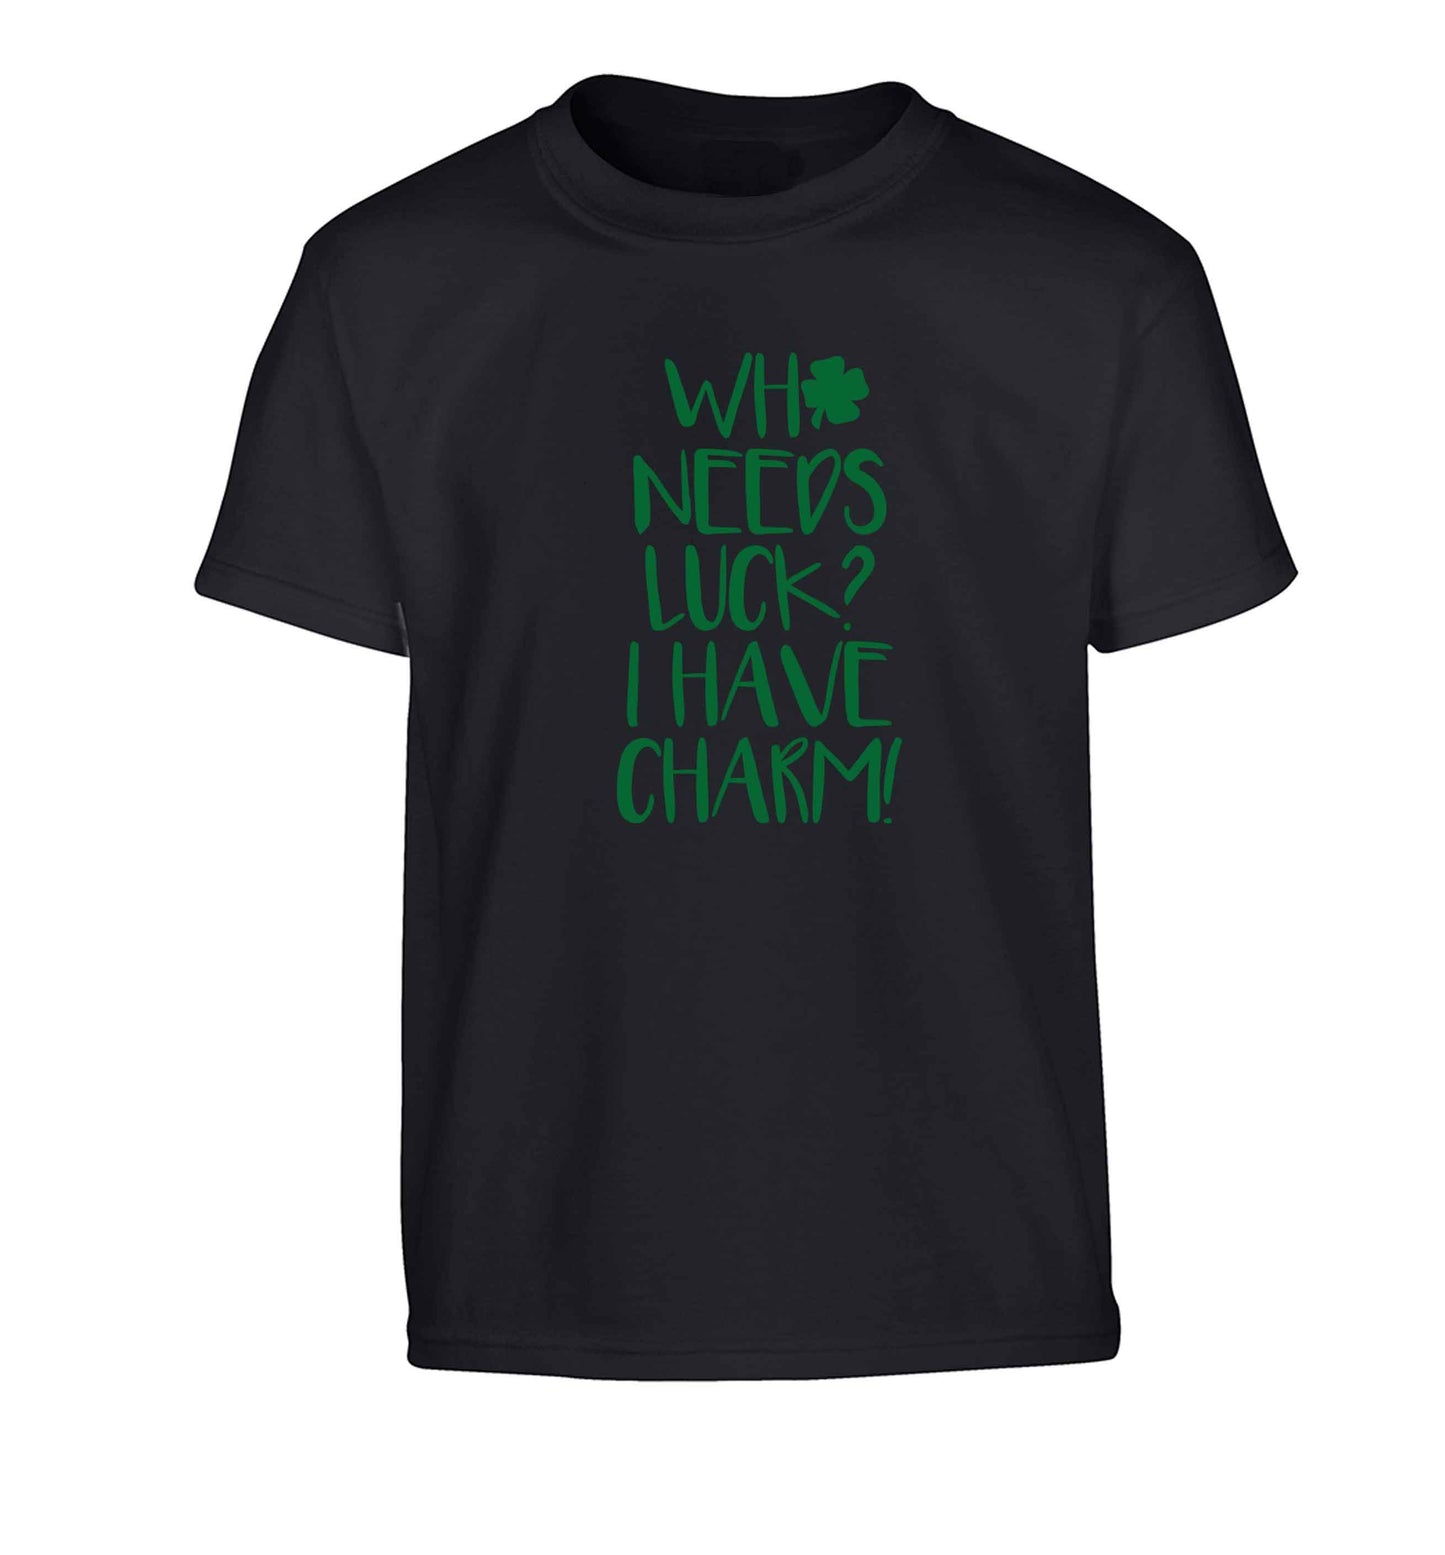 Who needs luck? I have charm! Children's black Tshirt 12-13 Years